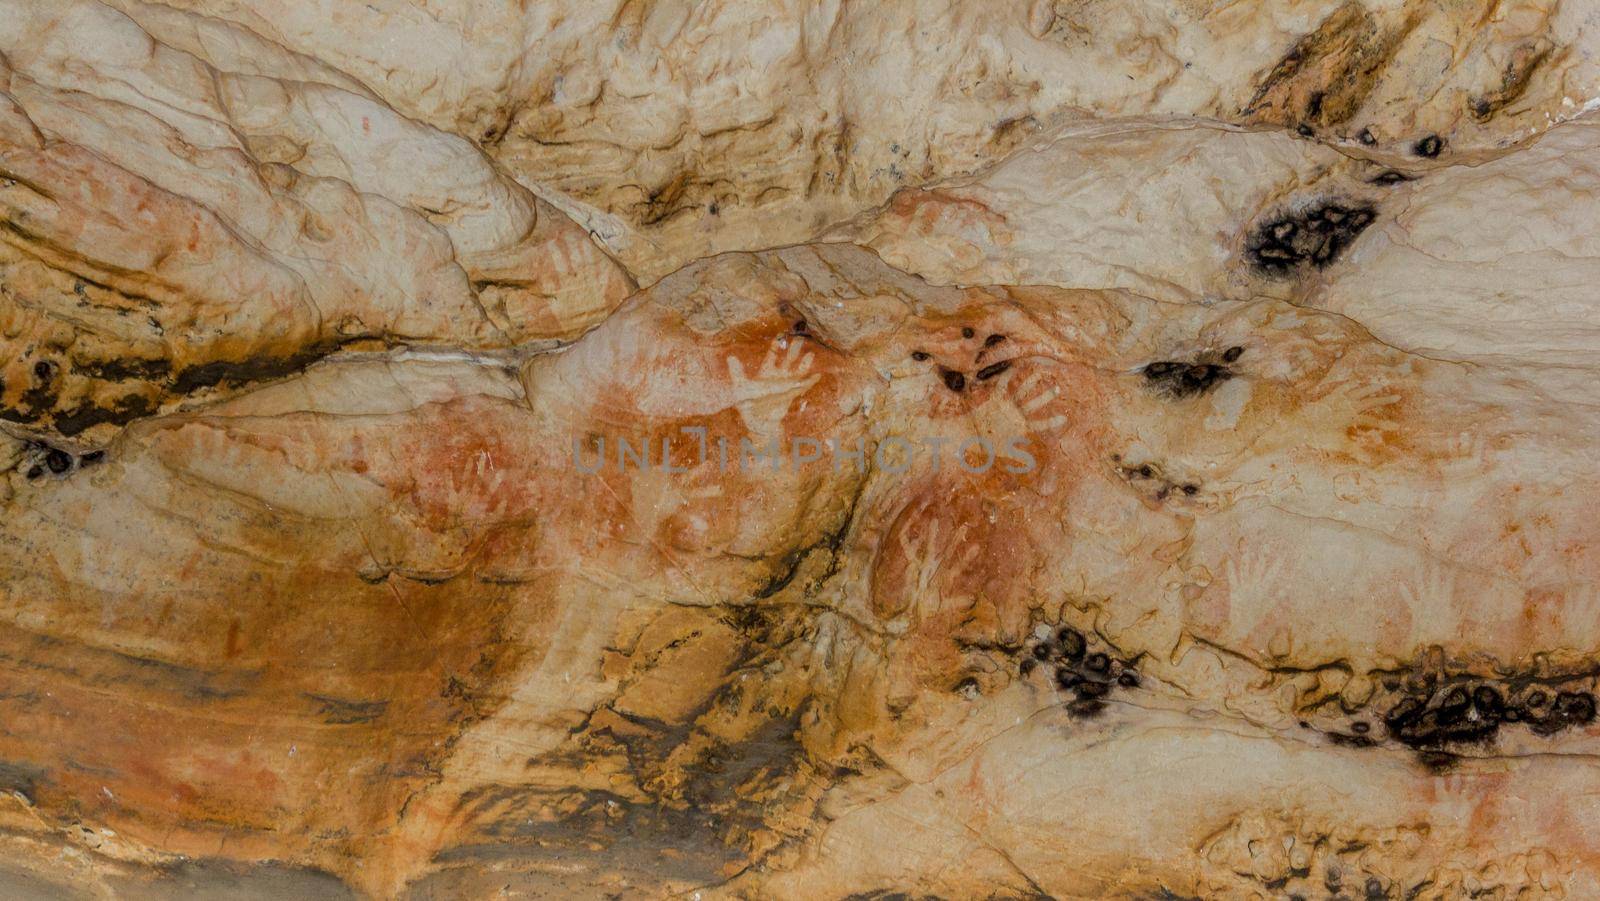 Aboriginal Art: hand prints in a cave, grampians national park by bettercallcurry